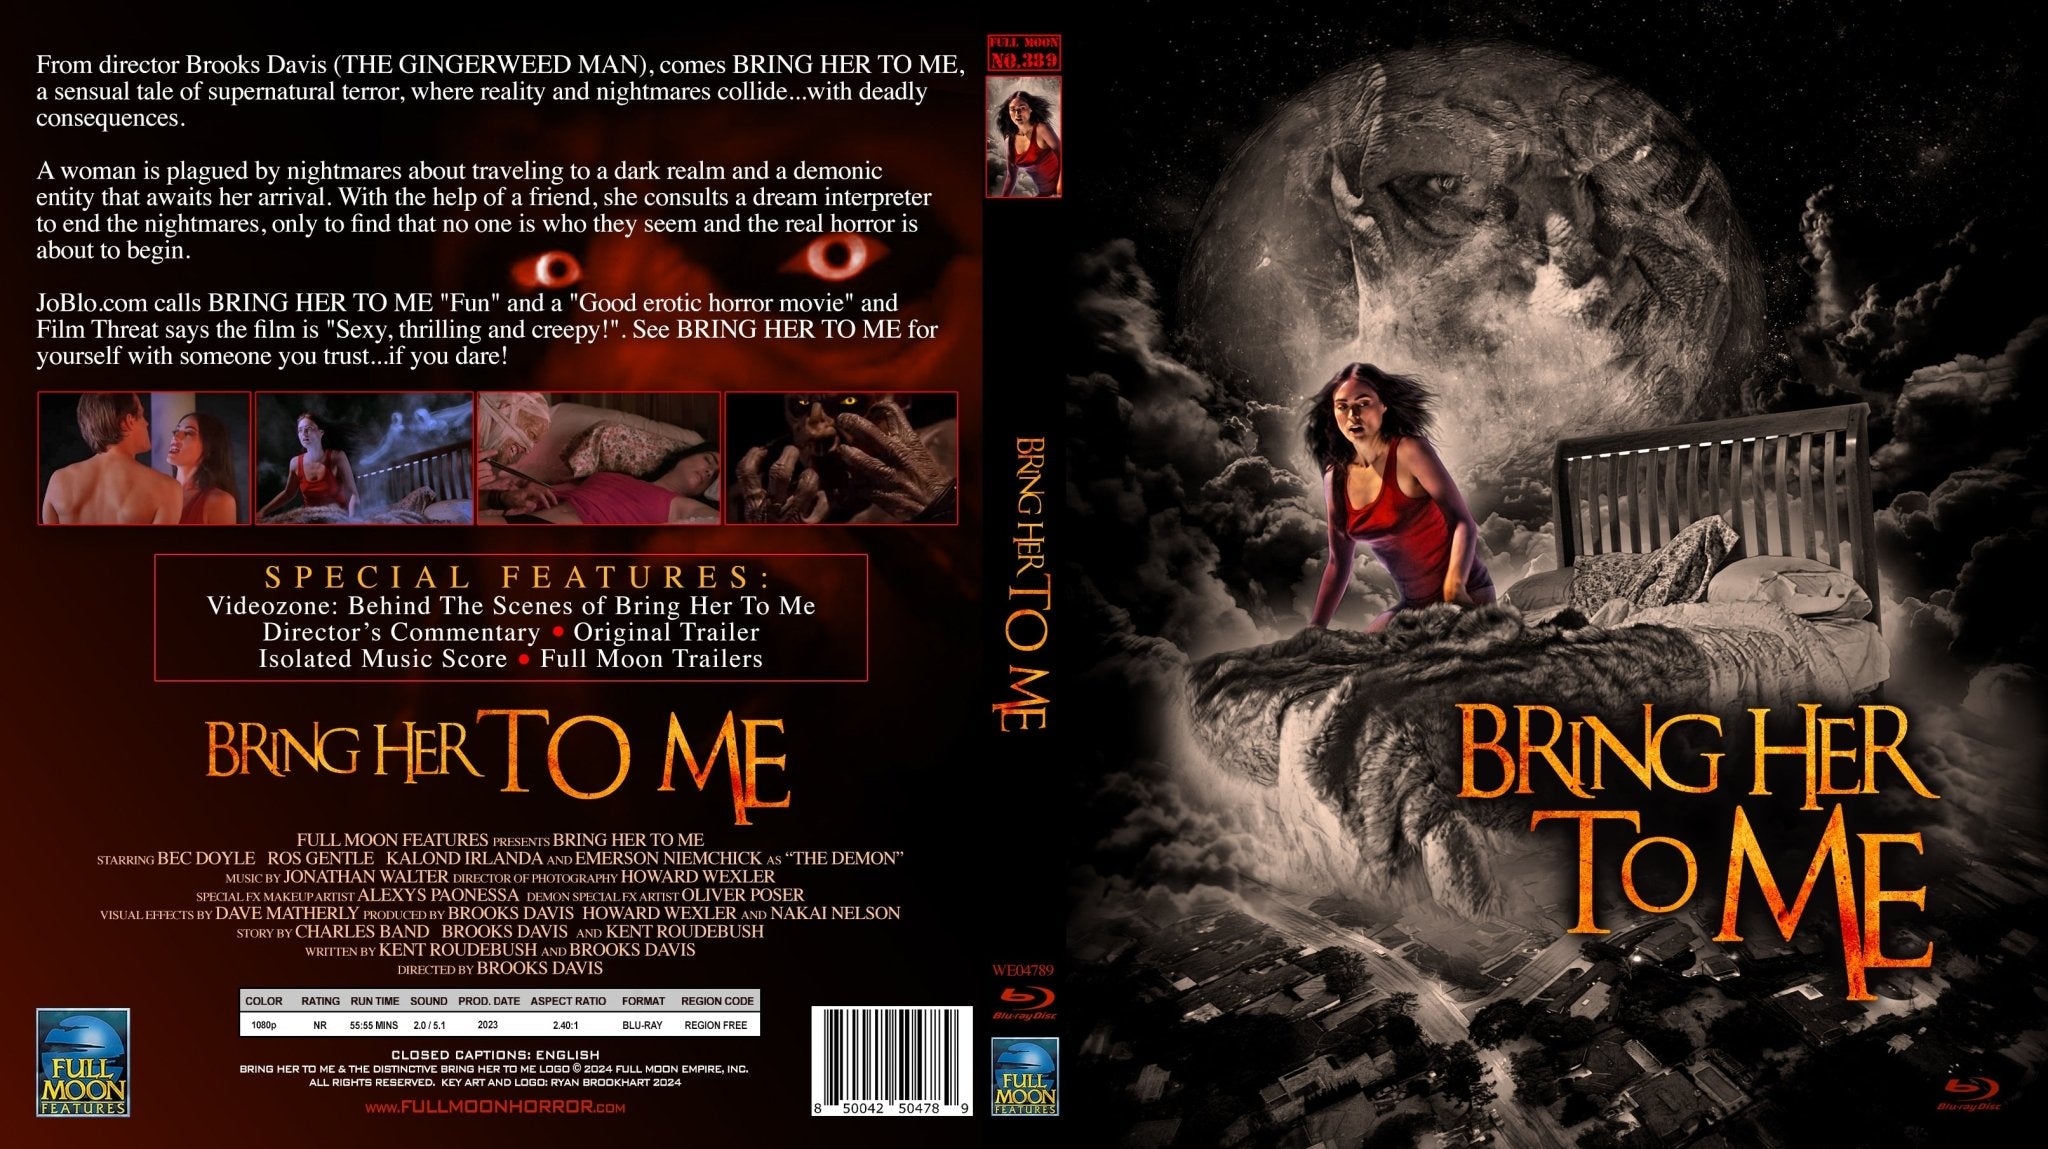 Bring Her To Me Blu-ray